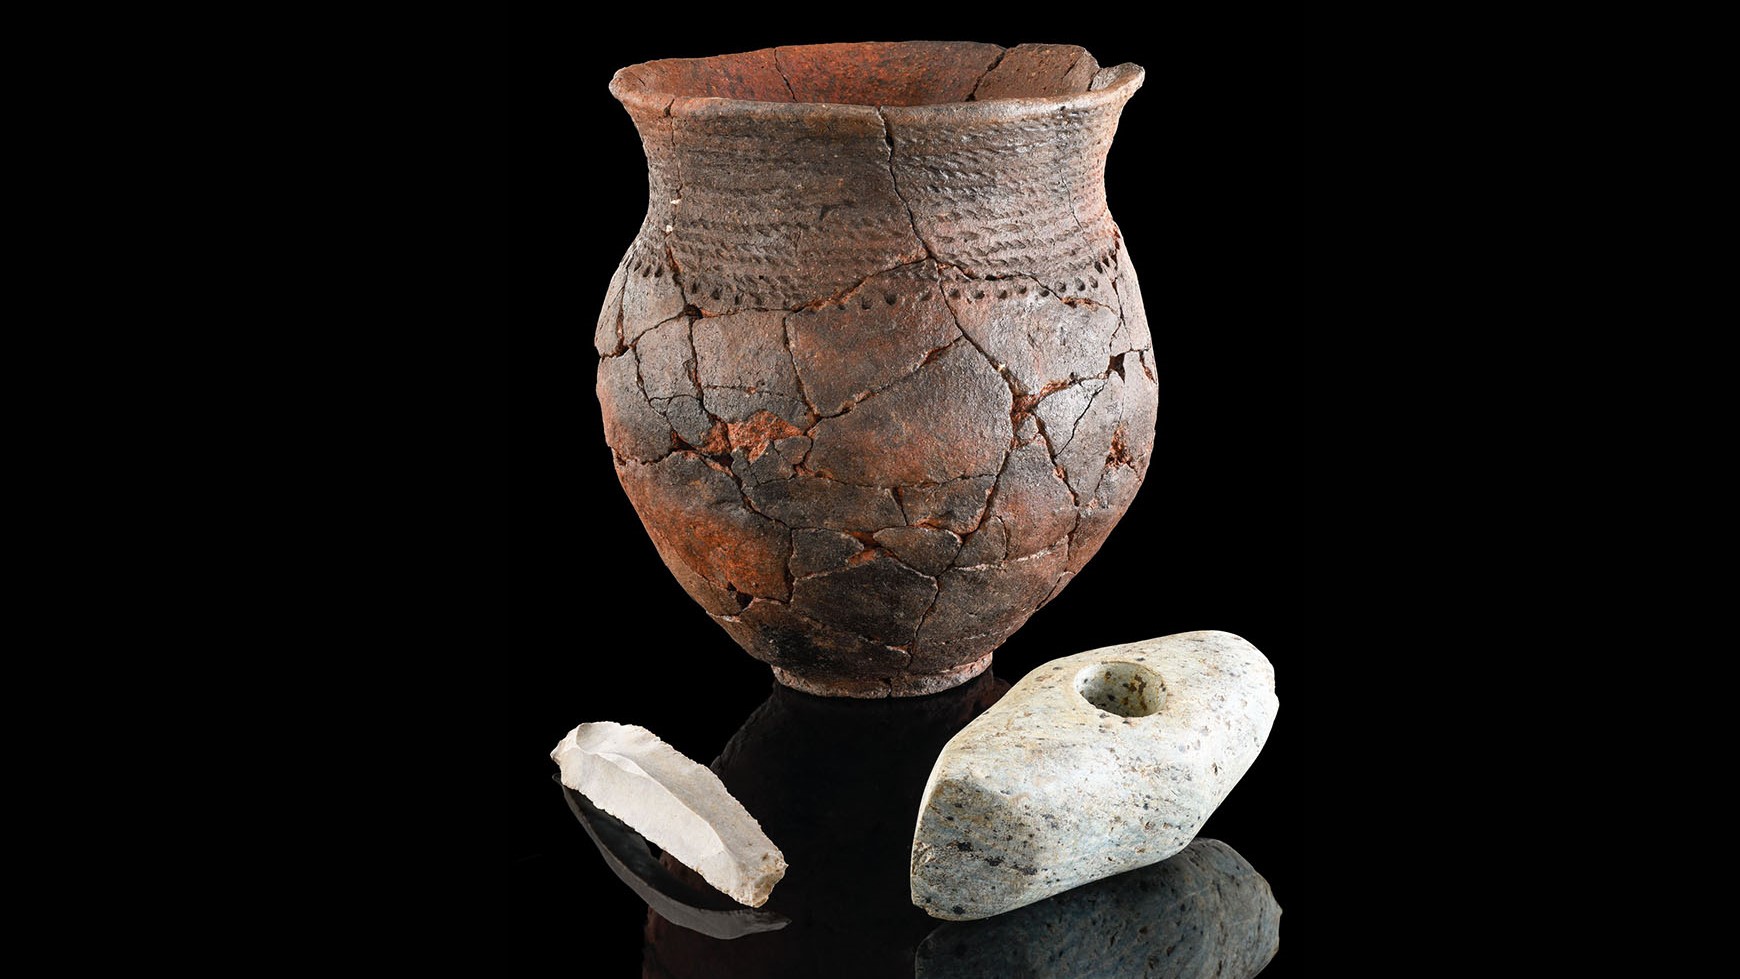 A corded ware pot, rock ax, and flint blade from a Stone Age grave found in southwestern Germany.